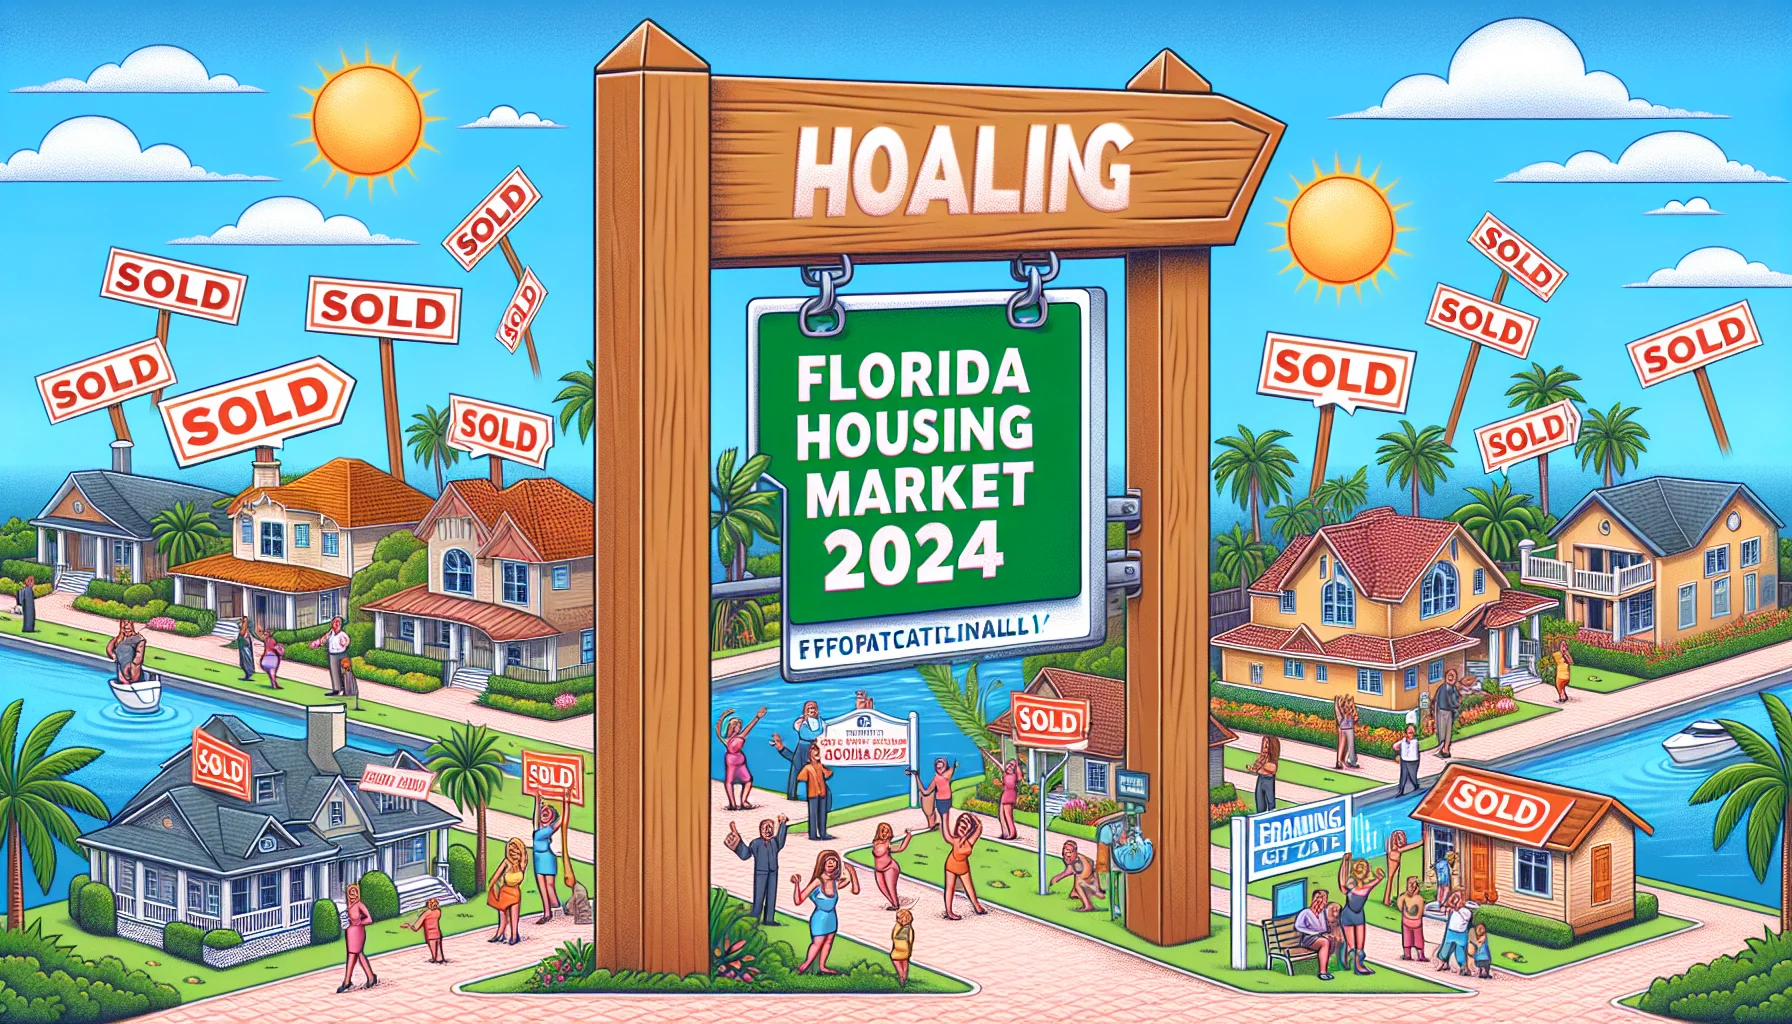 Show a humorous and realistic image of the Florida housing market in 2024. Picture a fantastically optimal real-estate scenario. Have a signpost with the label 'Florida Housing Market 2024' standing out. Incorporate attributes exemplifying a booming market, like houses with 'Sold' billboards, people excited over their property purchases. Also include elements that are representative of Florida such as palm trees and waterfront houses. Make it lively and colorful.